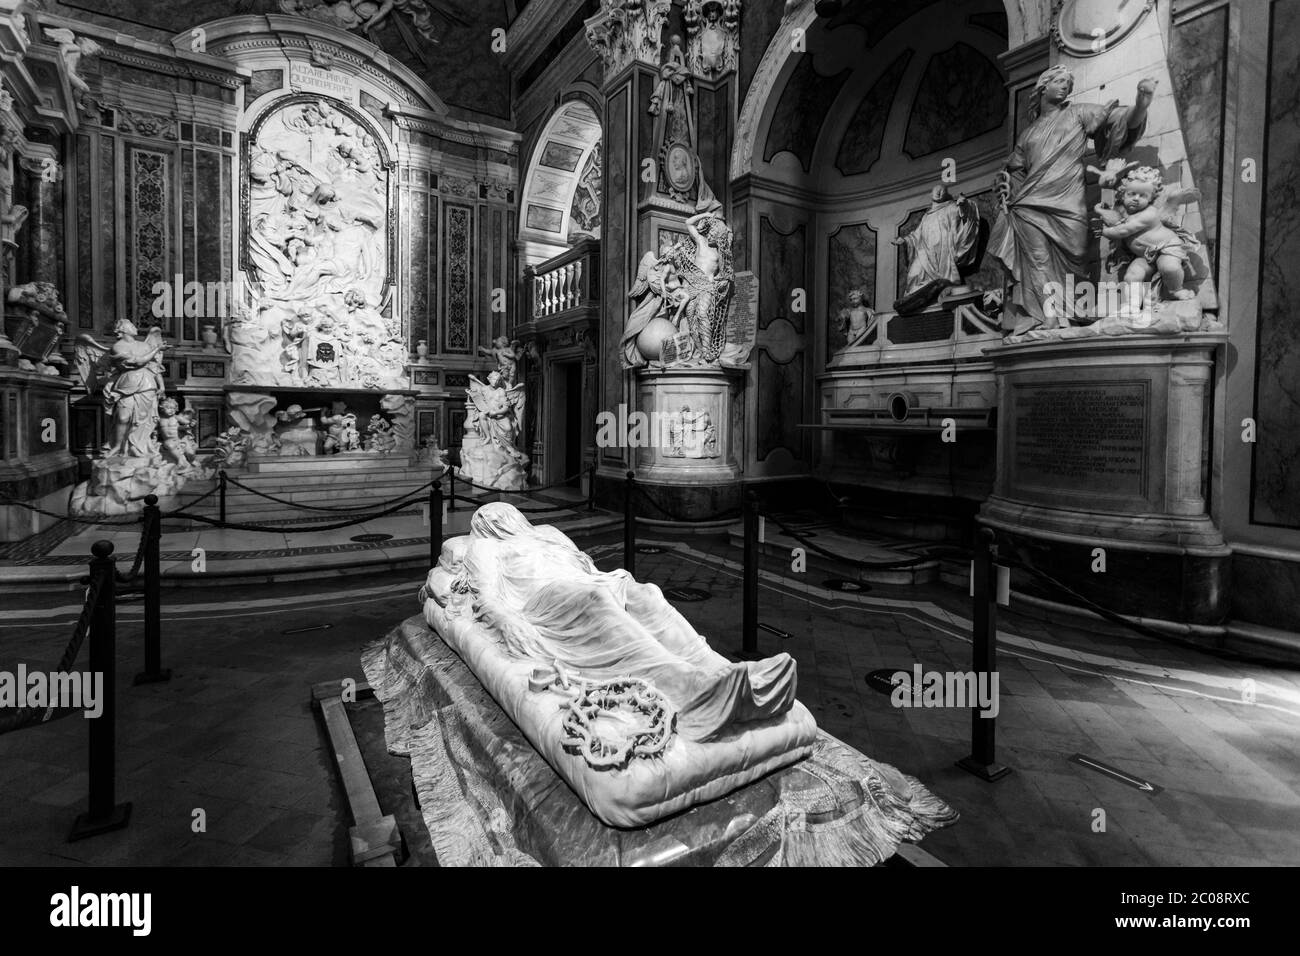 Napoli, CAMPANIA, ITALIA. 11th June, 2020. 06/11/2020 Naples, reopening of the Sansevero Chapel in the heart of Naples after closing to tourists for the Covid-19 pandemic Credit: Fabio Sasso/ZUMA Wire/Alamy Live News Stock Photo